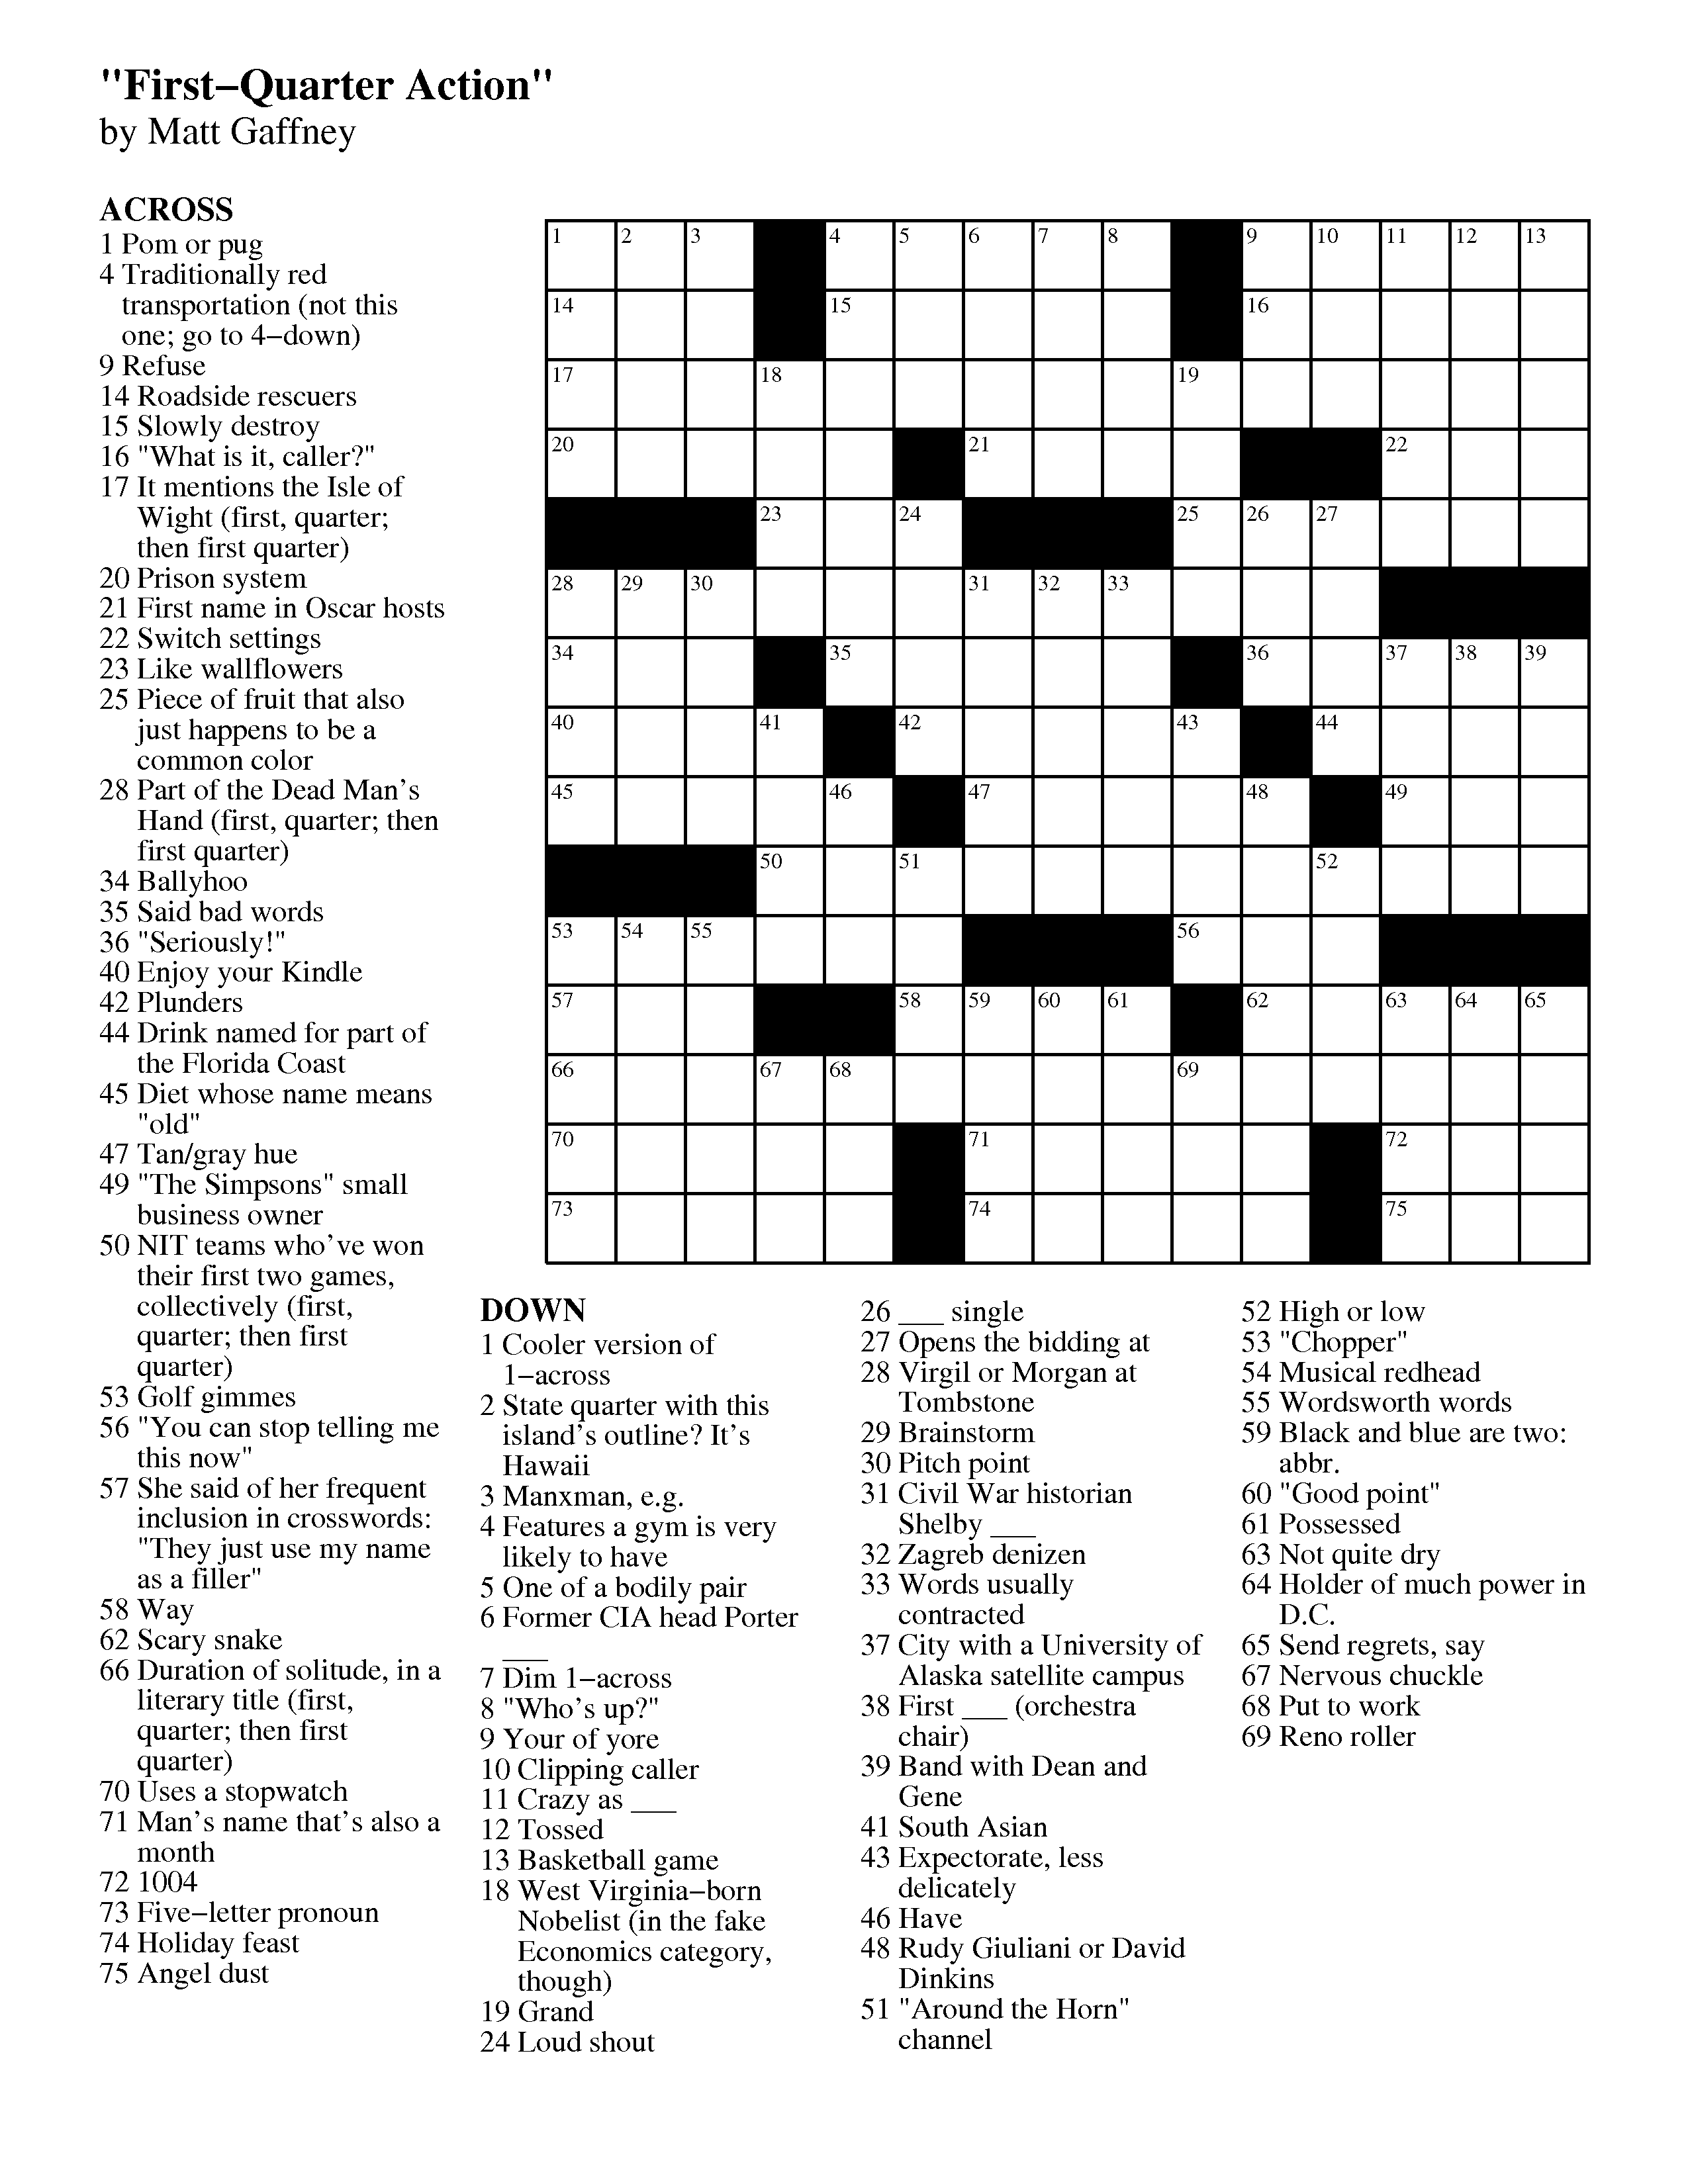 This Clue Is Not Here Crossword Clue.